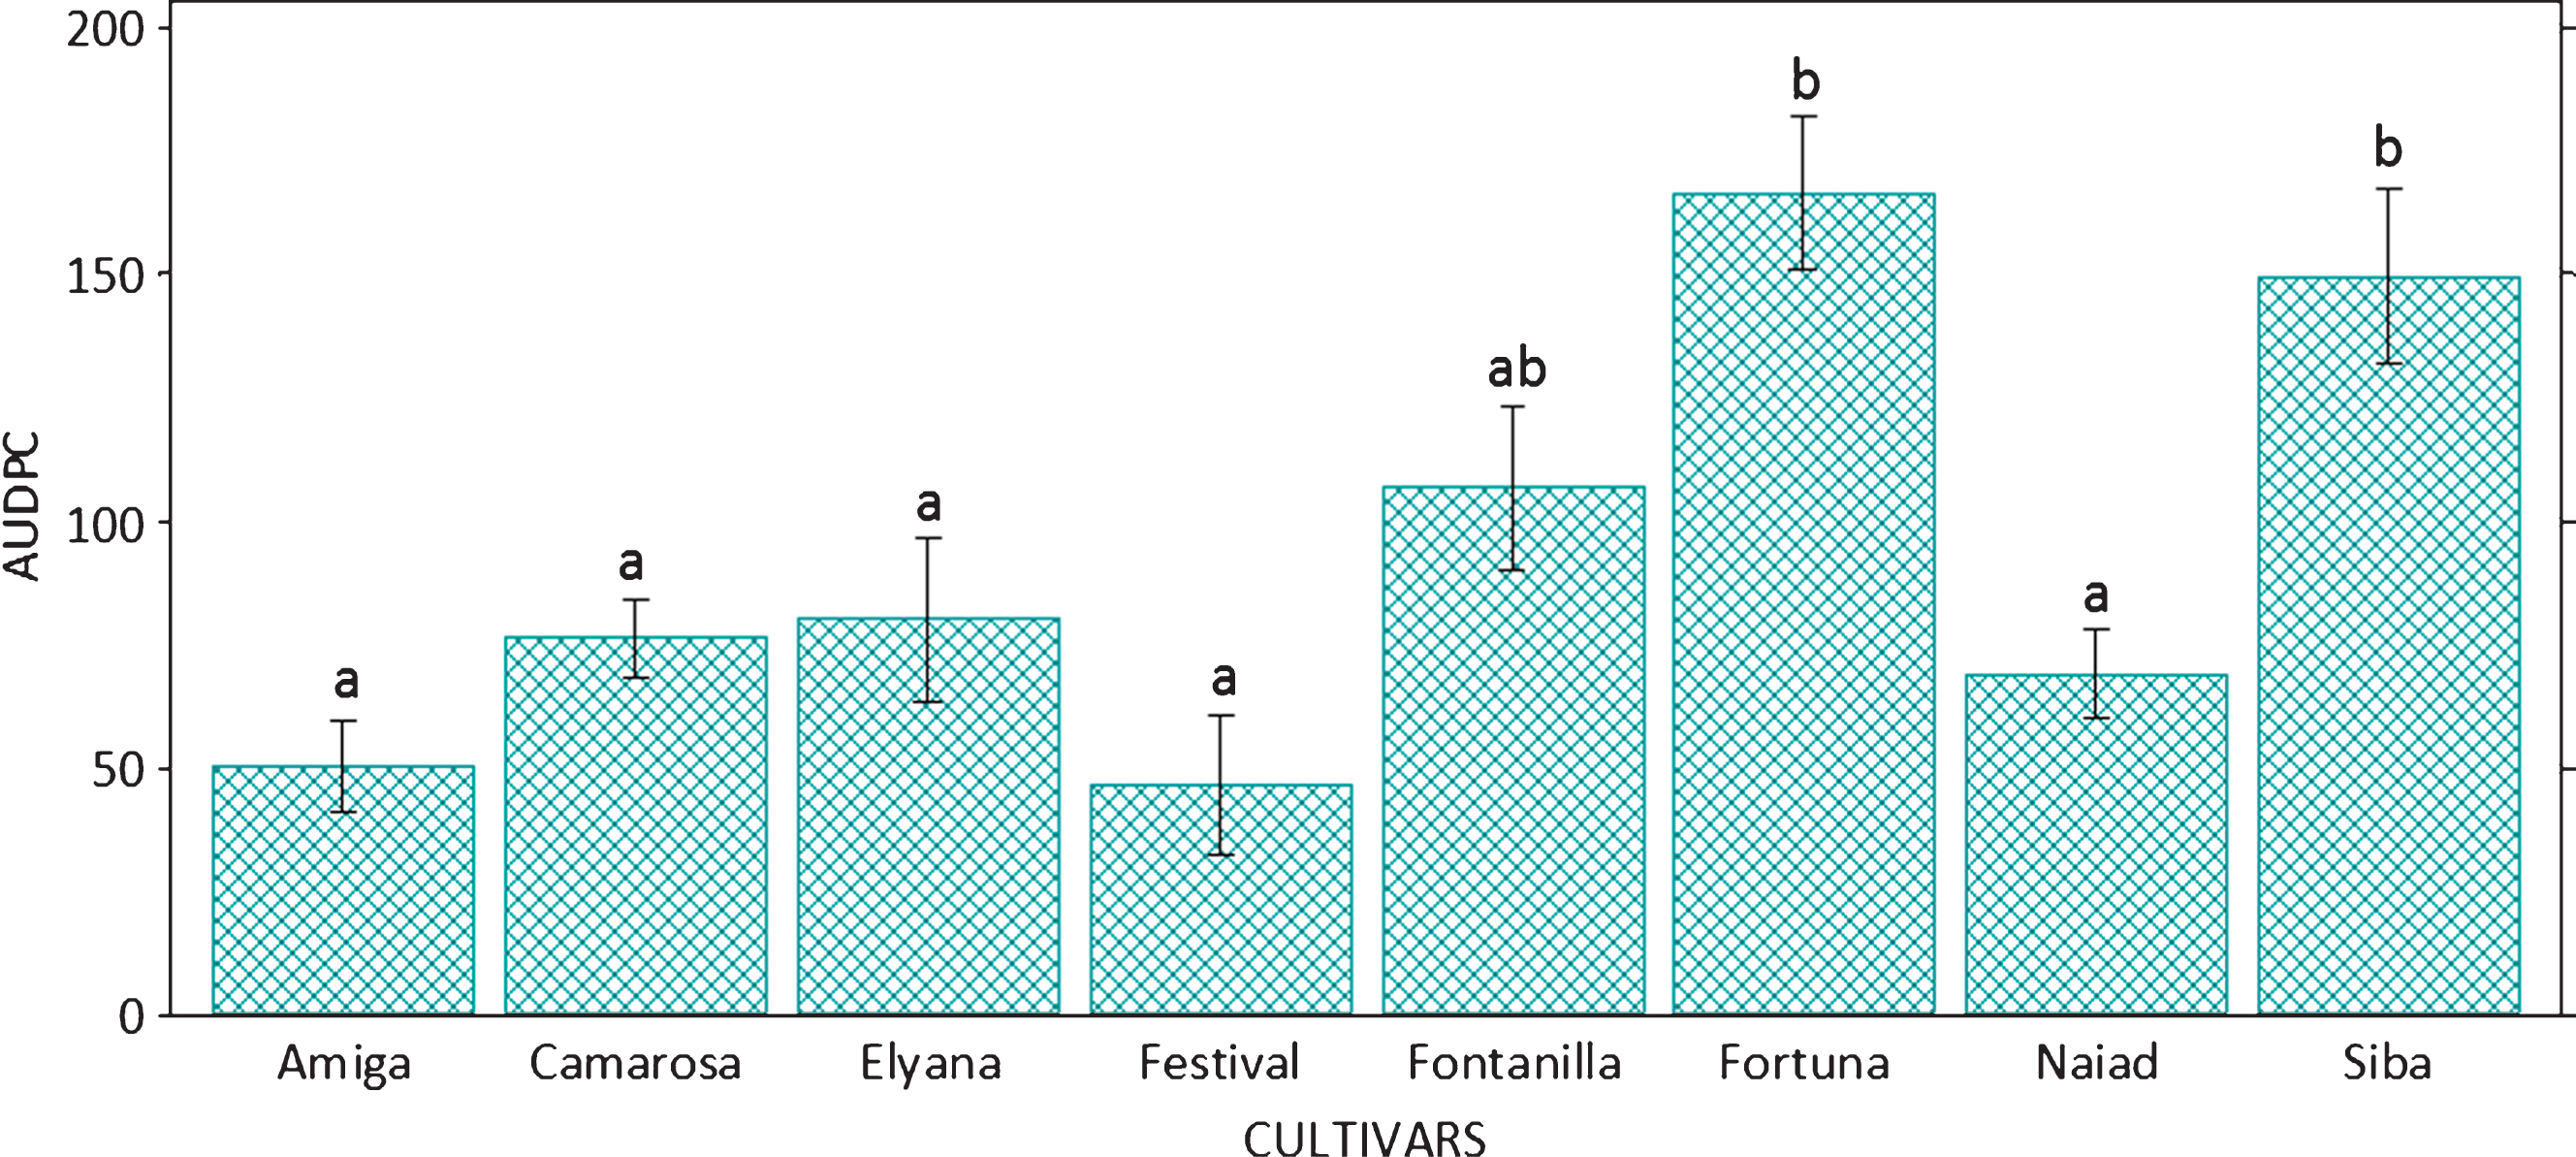 Area under the disease progress curve (AUDPC) according to severity of aerial symptoms, of strawberry plants inoculated with Macrophomina phaseolina, maintained under greenhouse conditions. Bars indicate standard deviation. Columns with the same letter are not different according to Tukey’s HSD (p≤0.05).